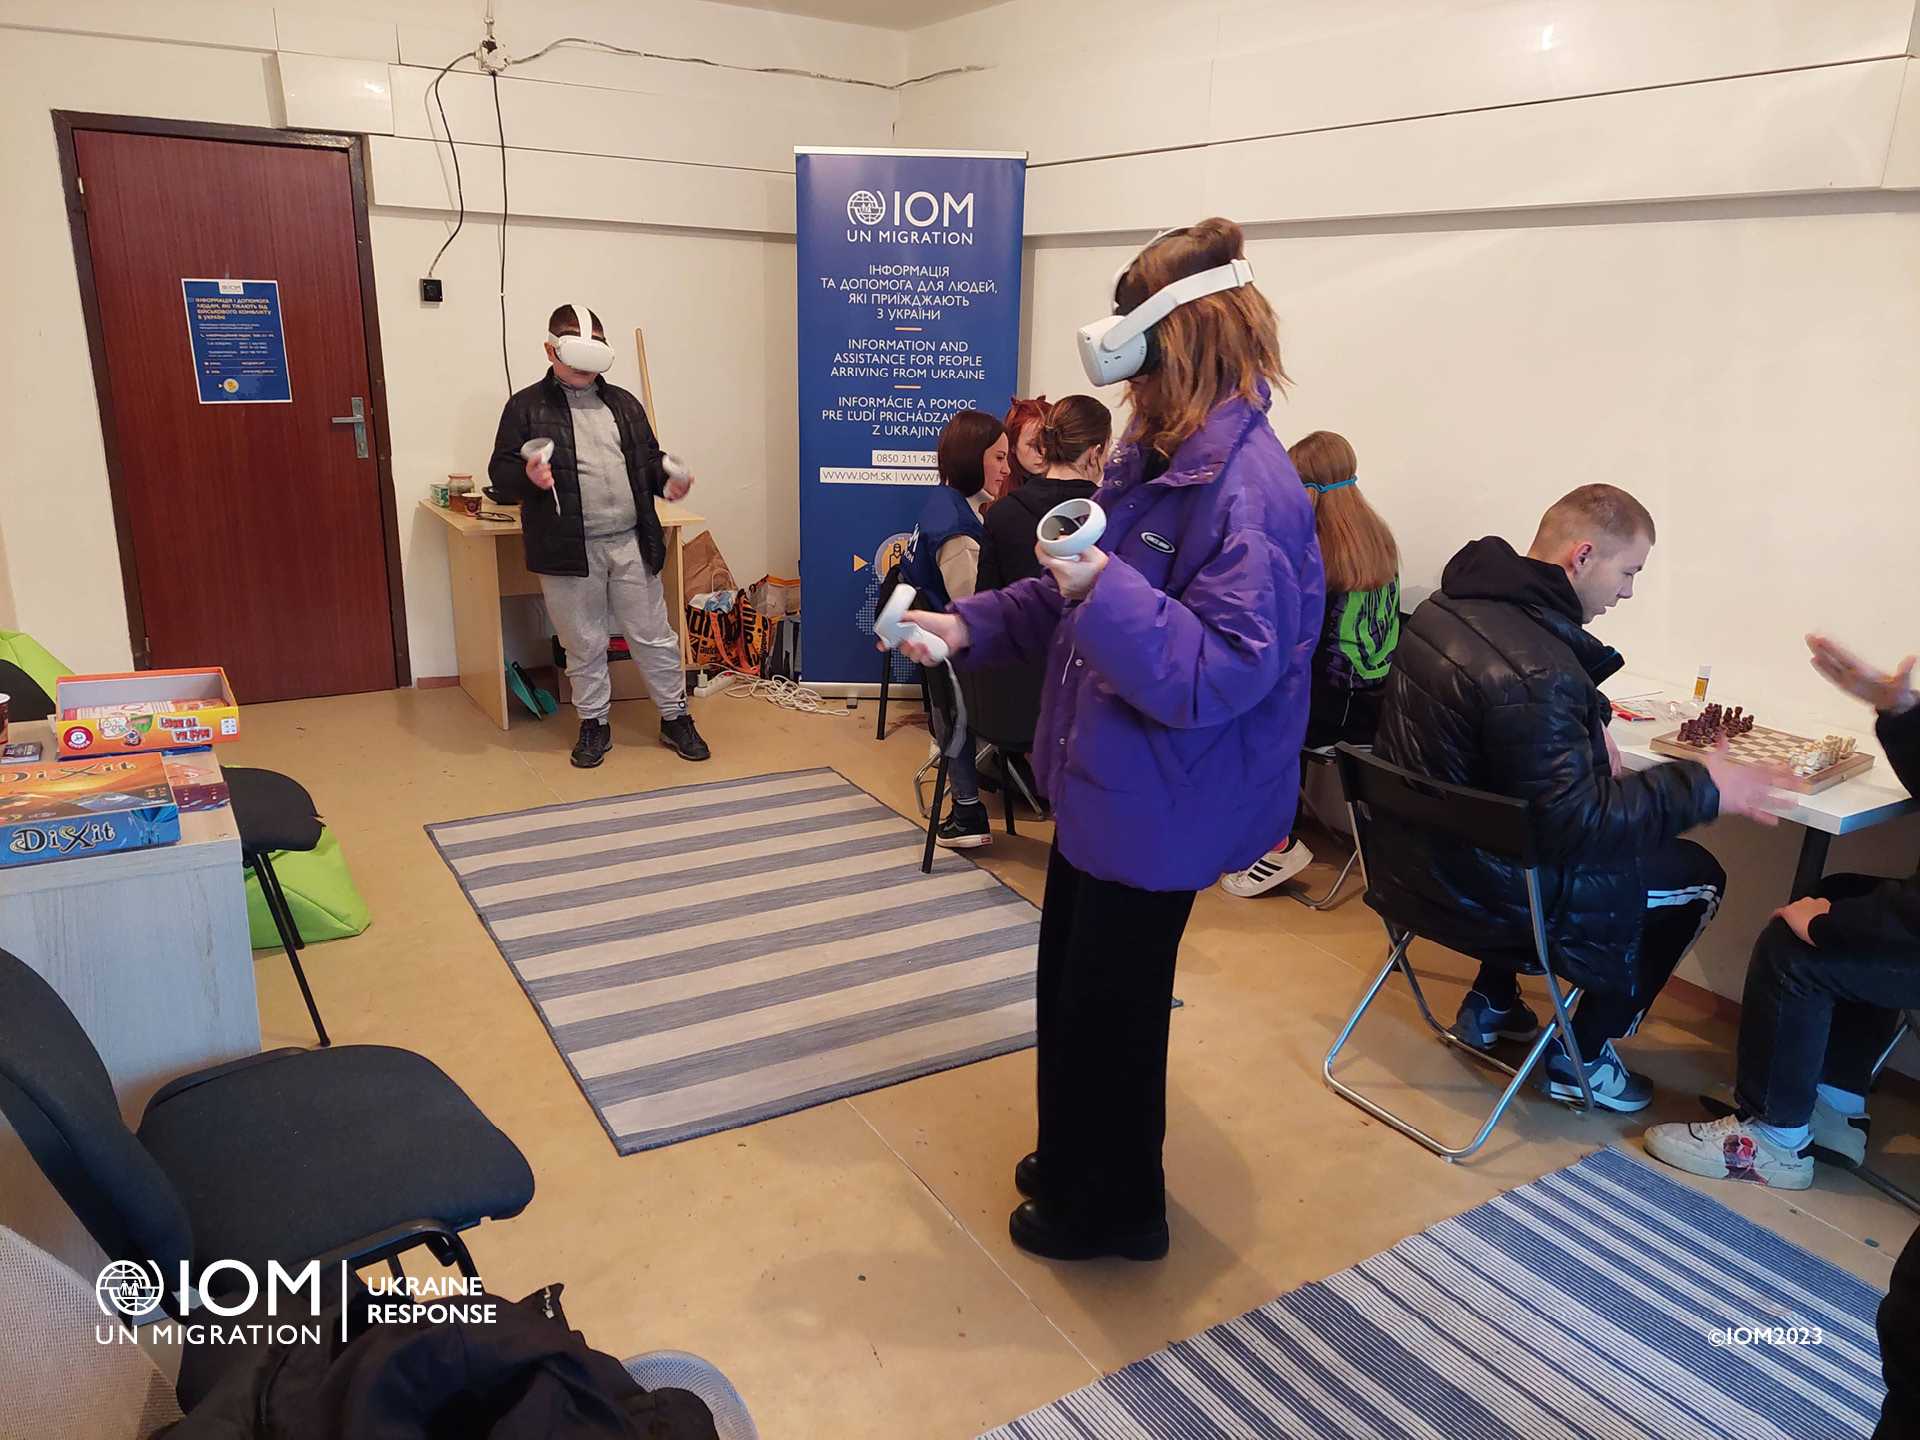 A session with psychosocial and community activities, including virtual reality, took place in December 2022 with 10 participants. Photo © International Organization for Migration (IOM) 2022.